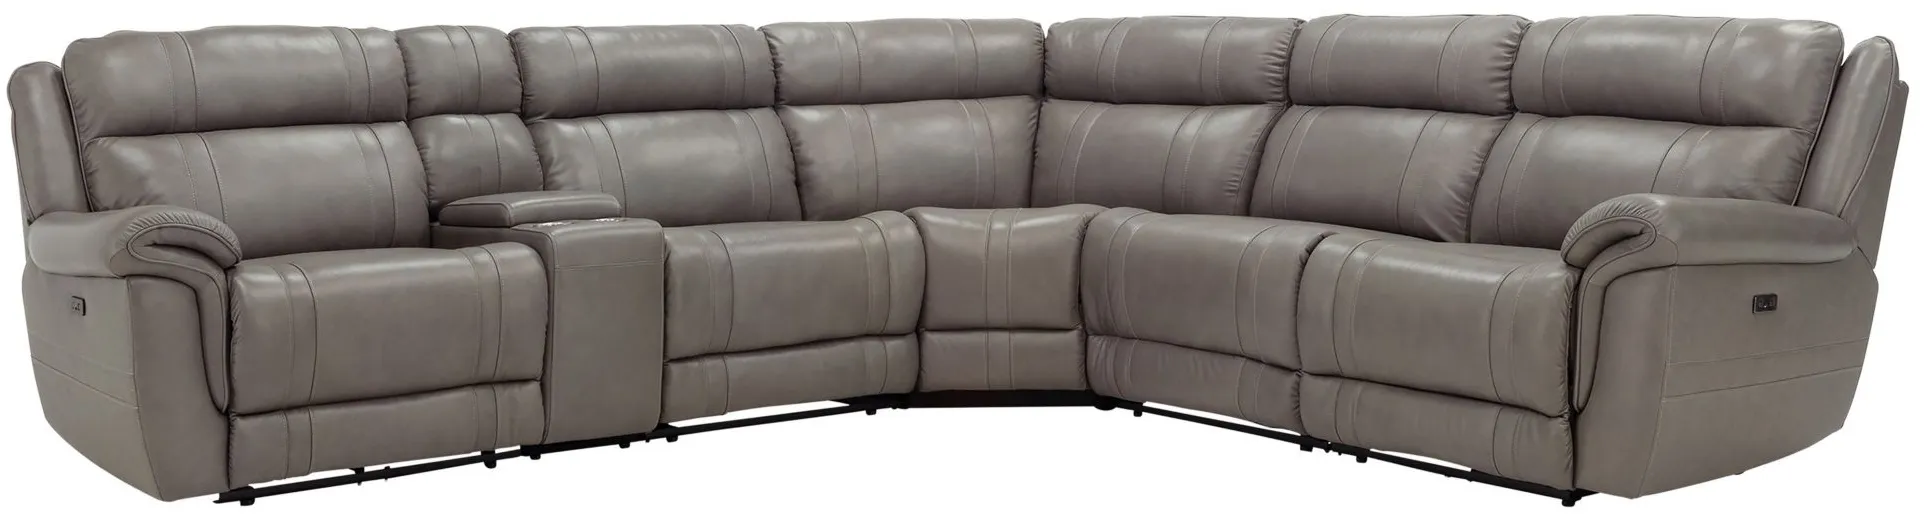 Ridgewood 6-pc. Leather Power-Reclining Sectional Sofa in Gray by Bellanest